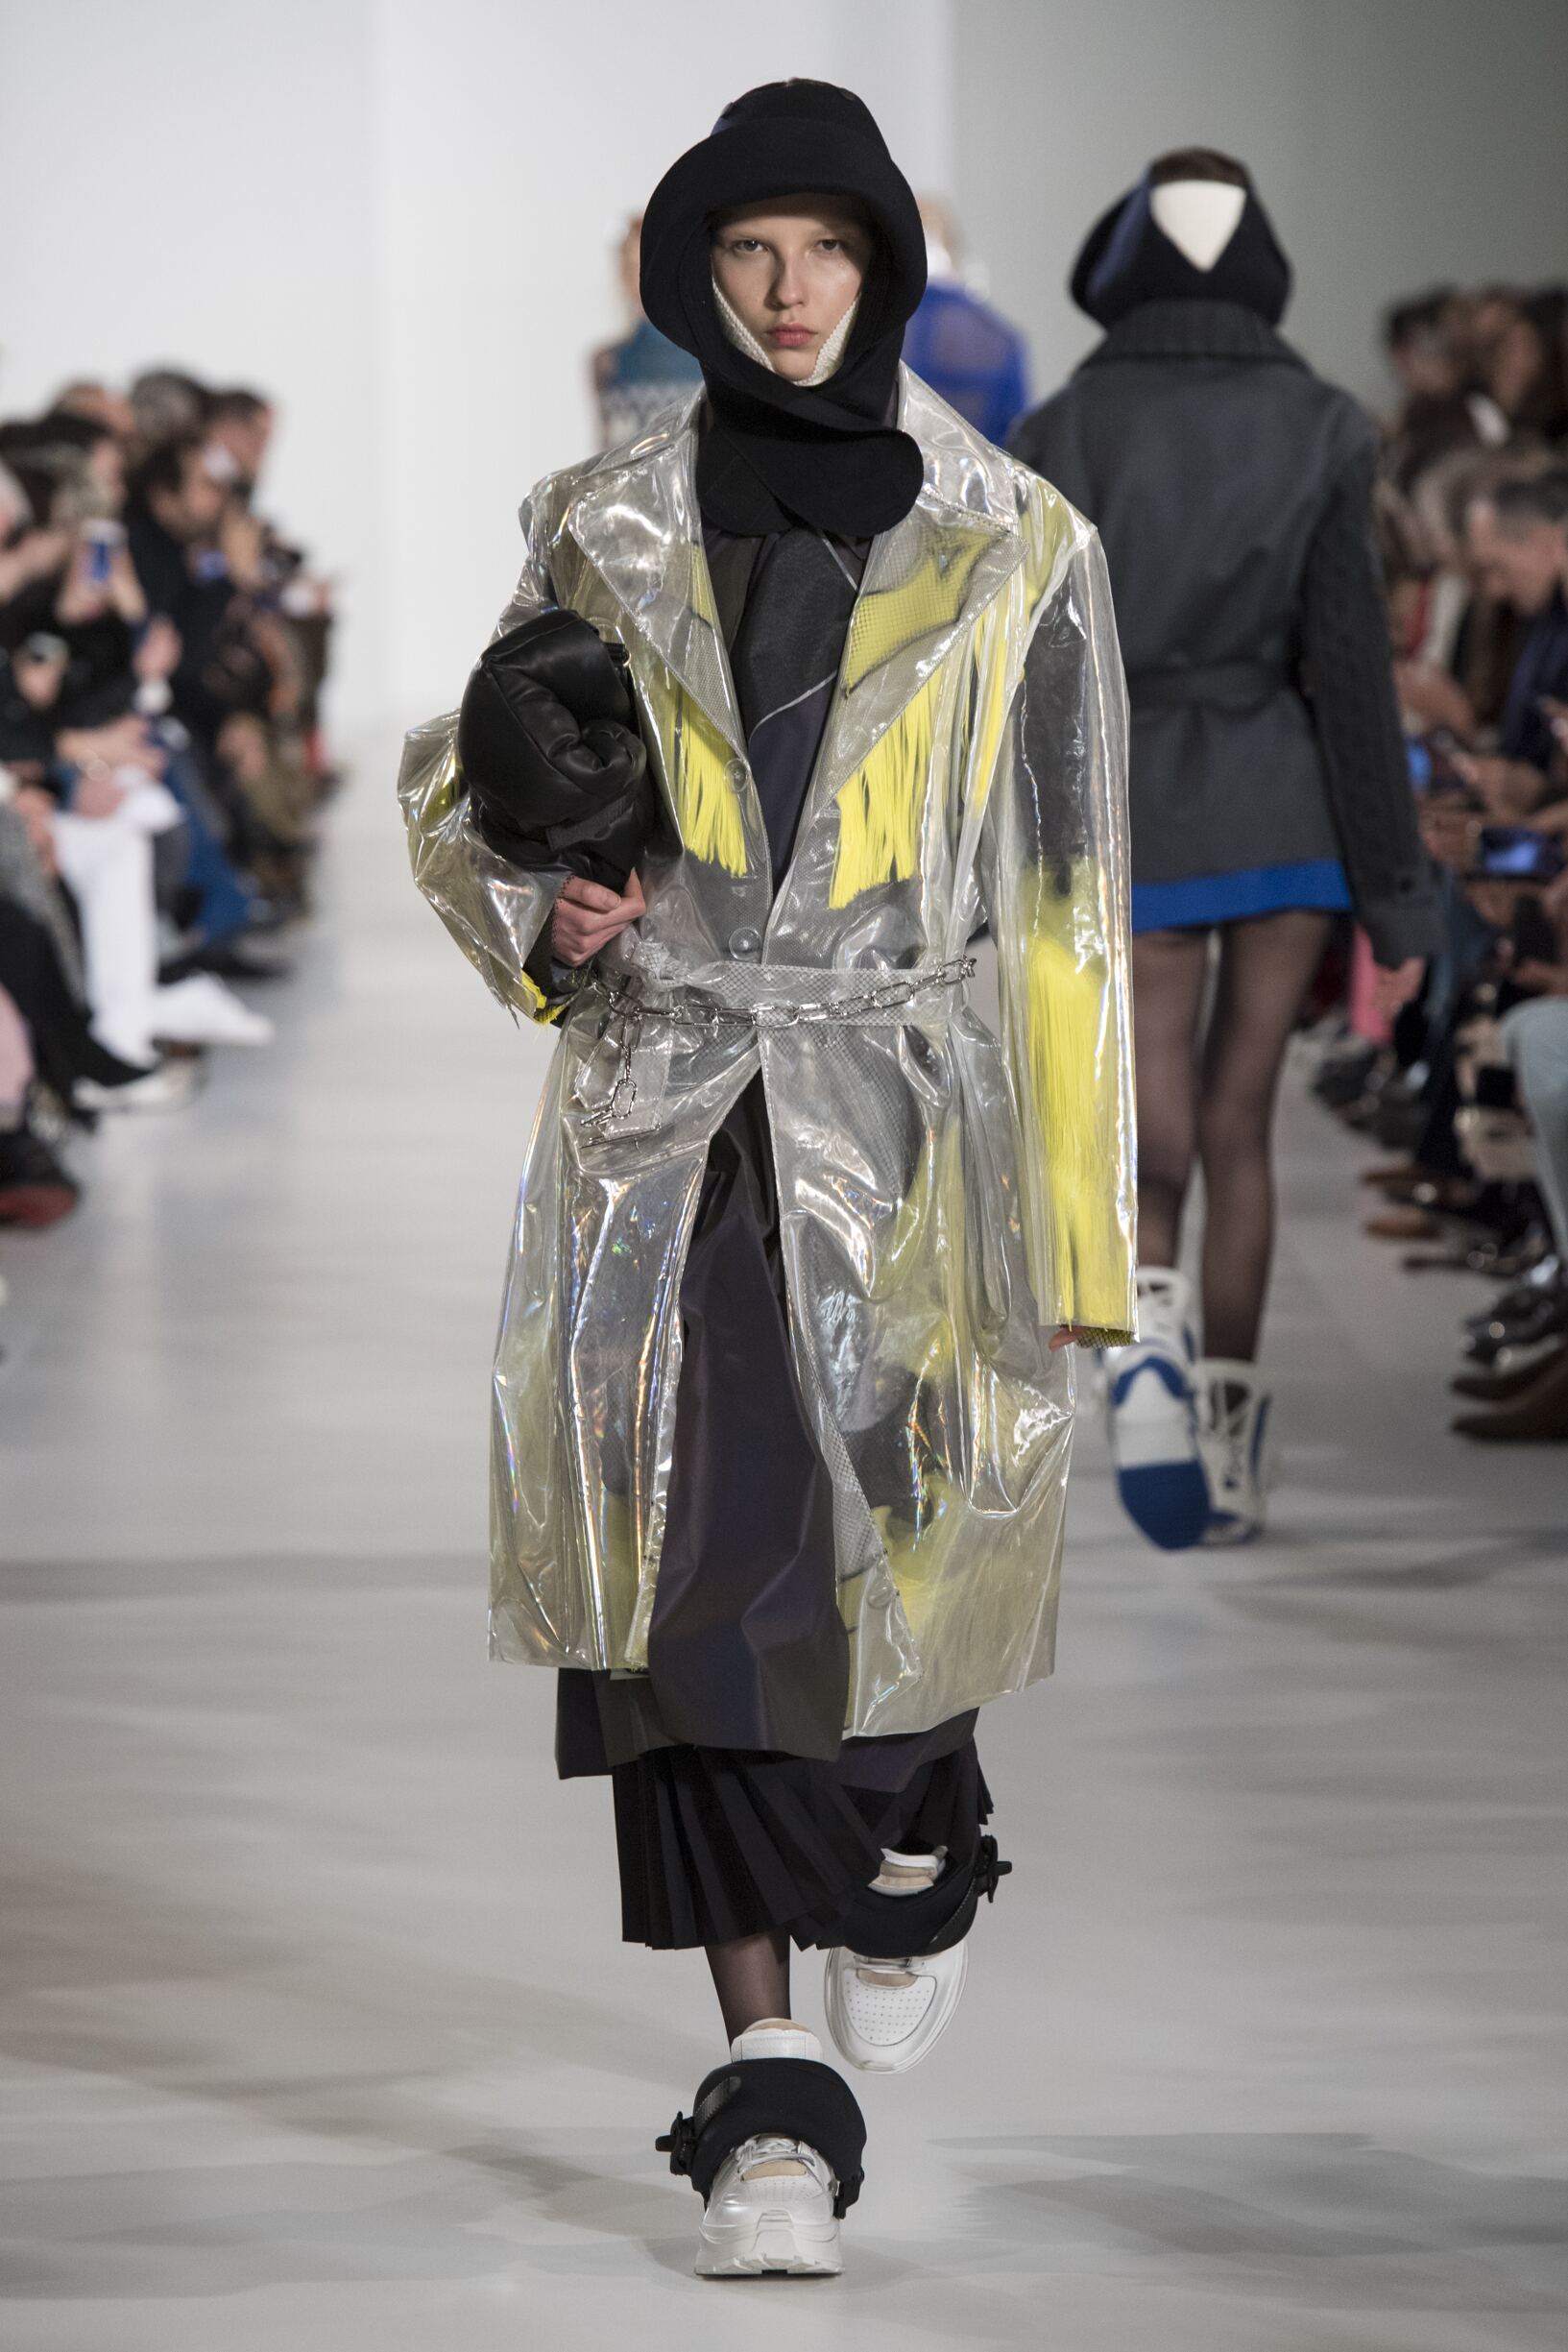 MAISON MARGIELA FALL WINTER 2018 WOMEN'S COLLECTION | The Skinny Beep